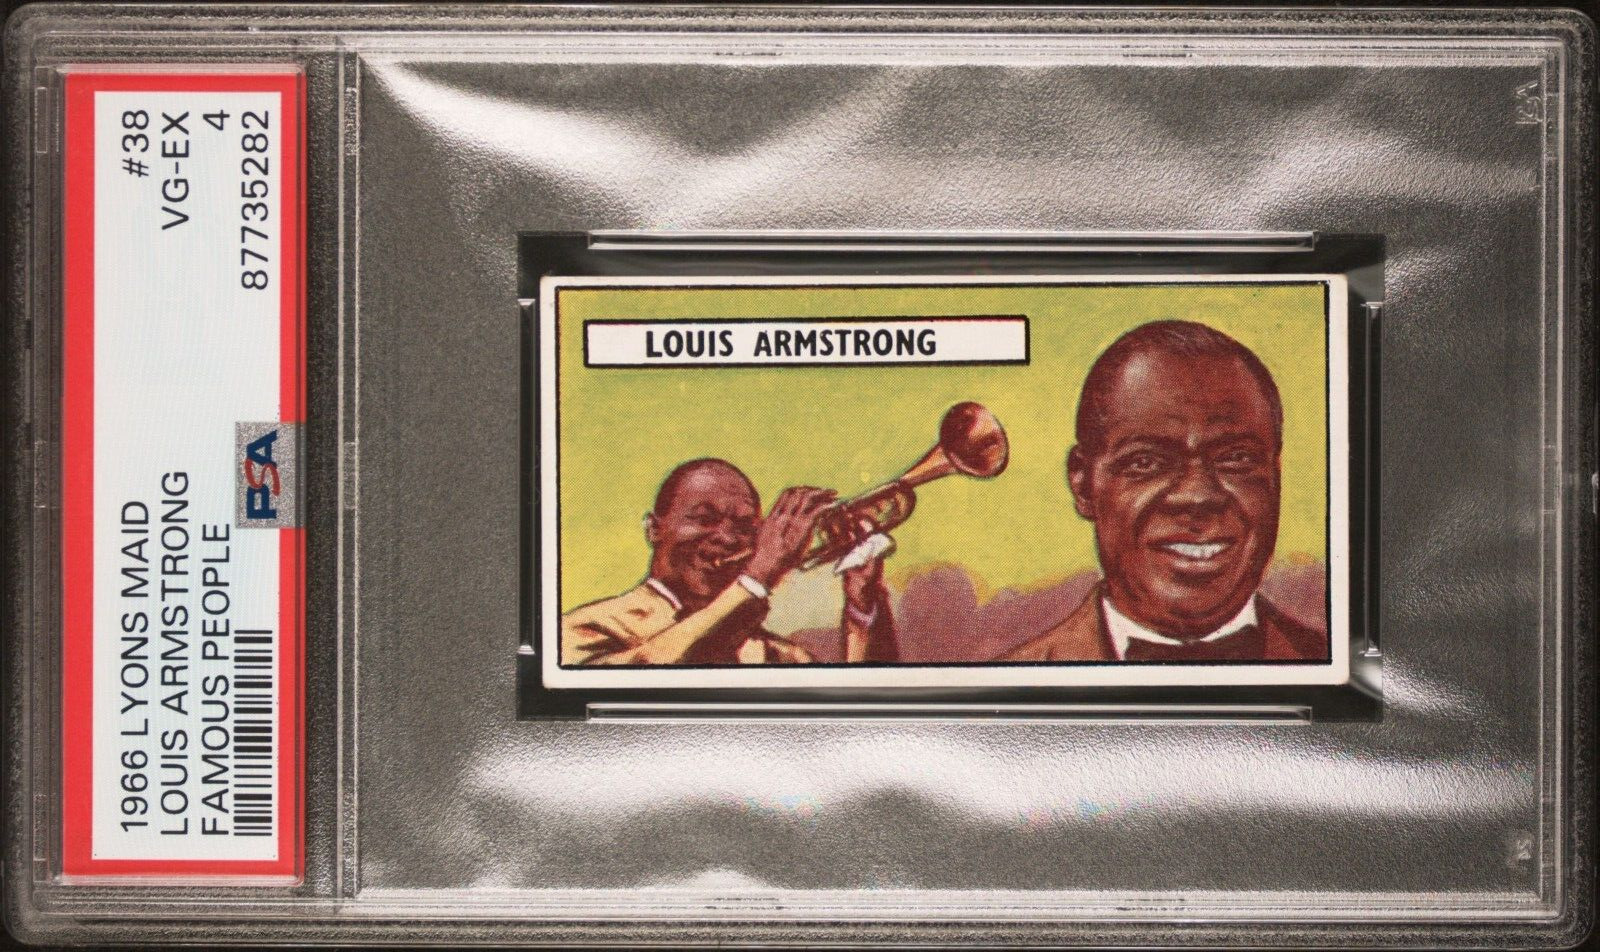 1966 LOUIS ARMSTRONG Lyons Maid Ice Cream Card #38 PSA 4